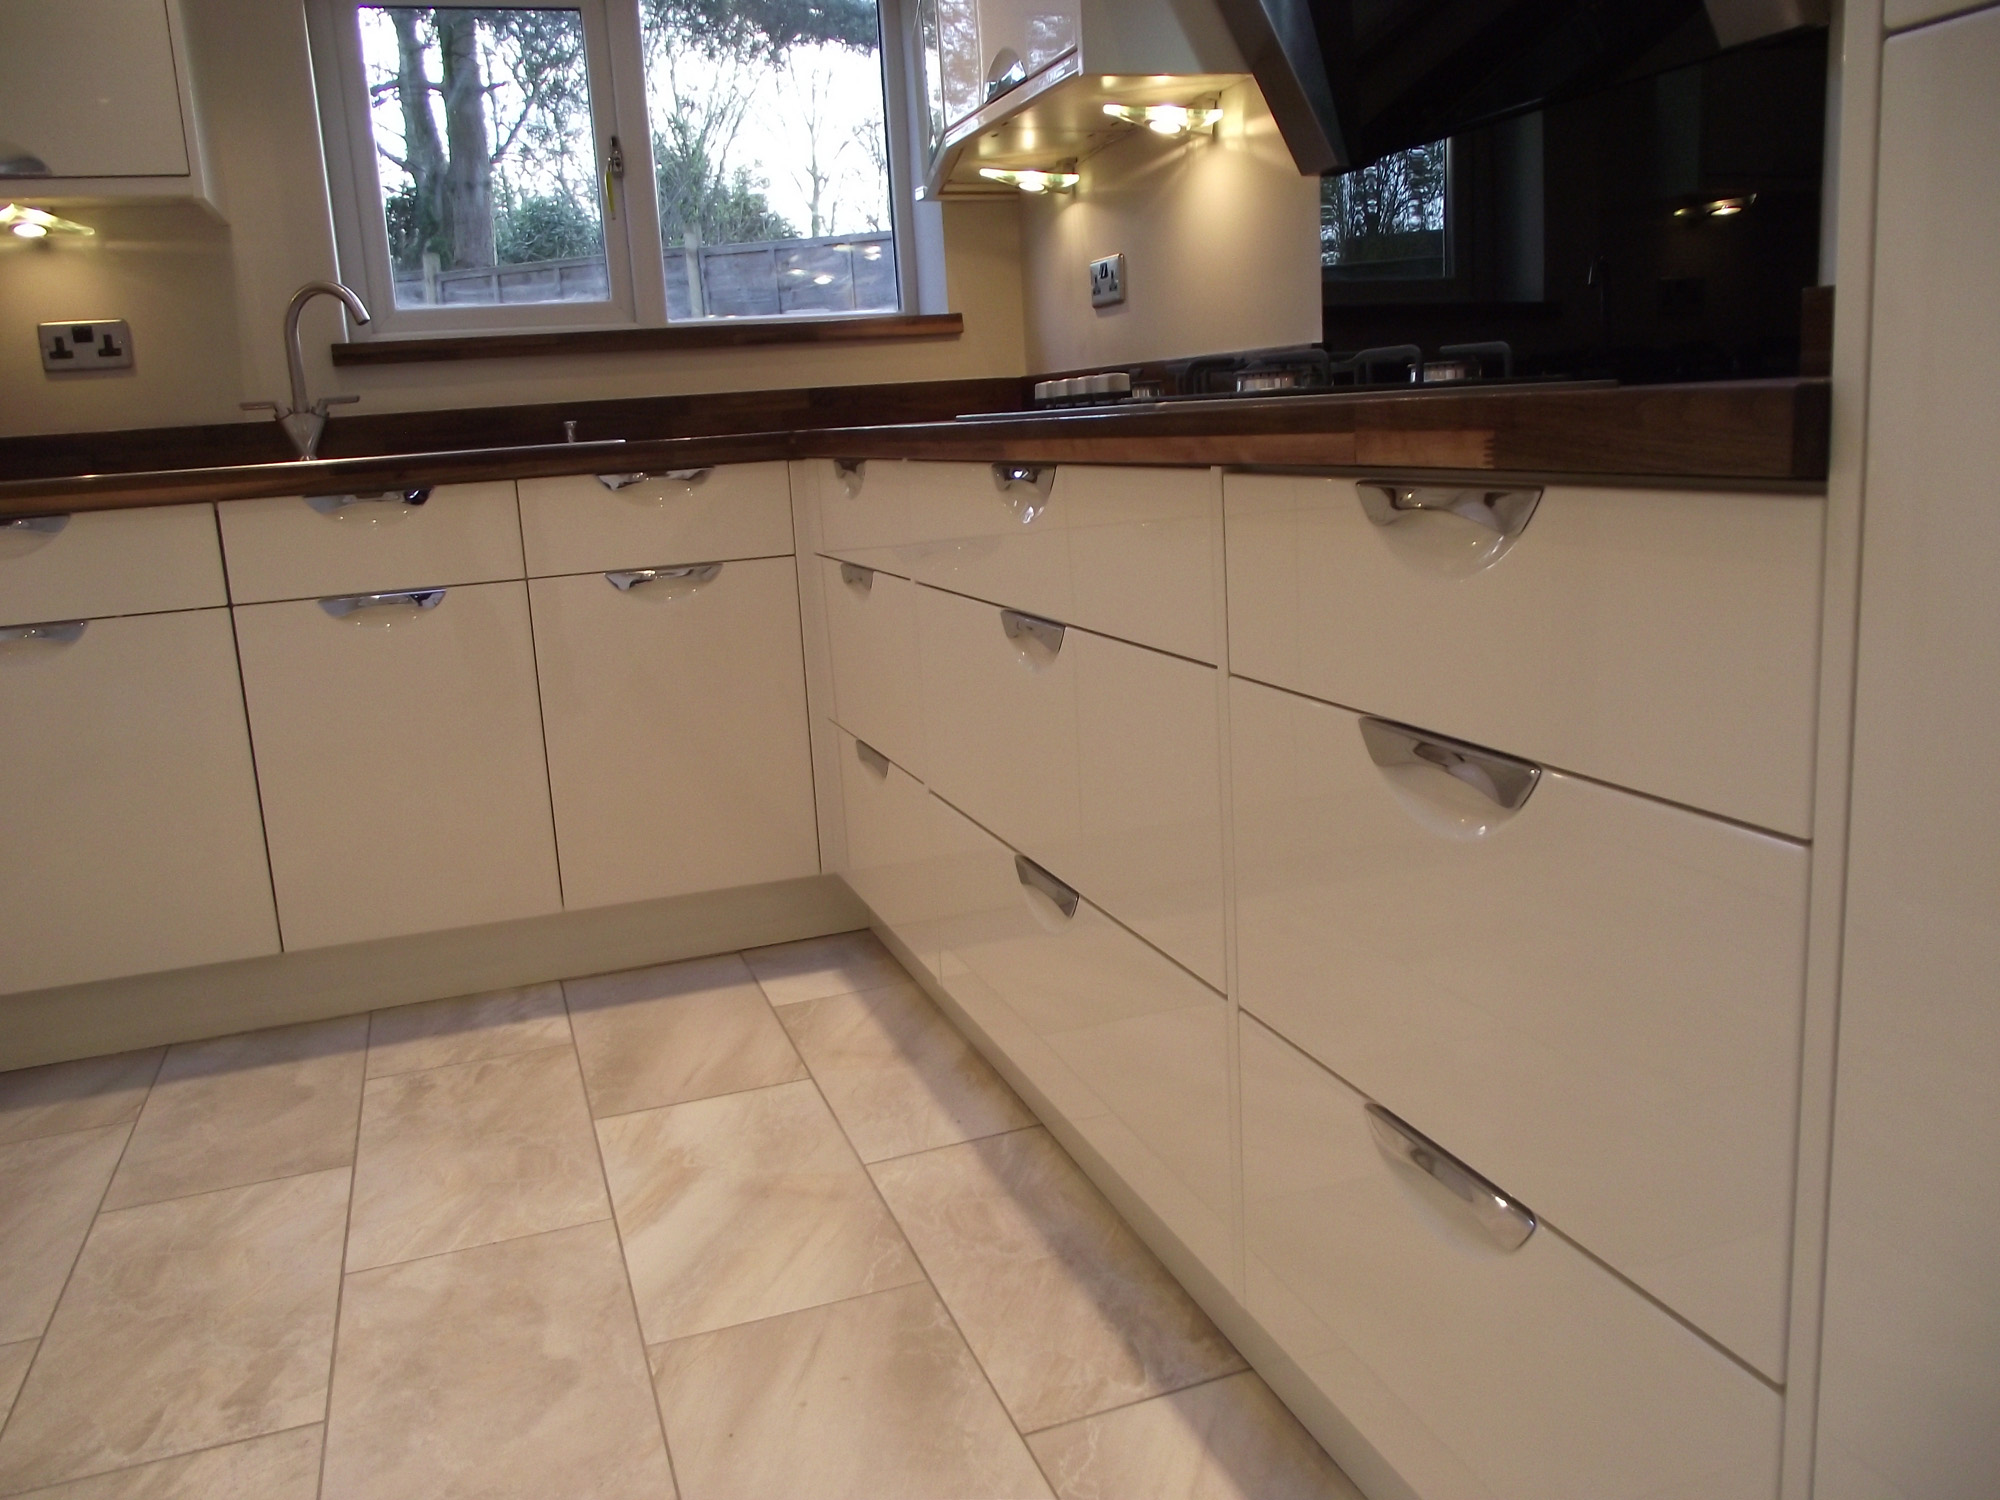 Mr Smith New Kitchen Leeds Cheap Kitchen Units And Cabinets For Sale Online Kitchen Warehouse